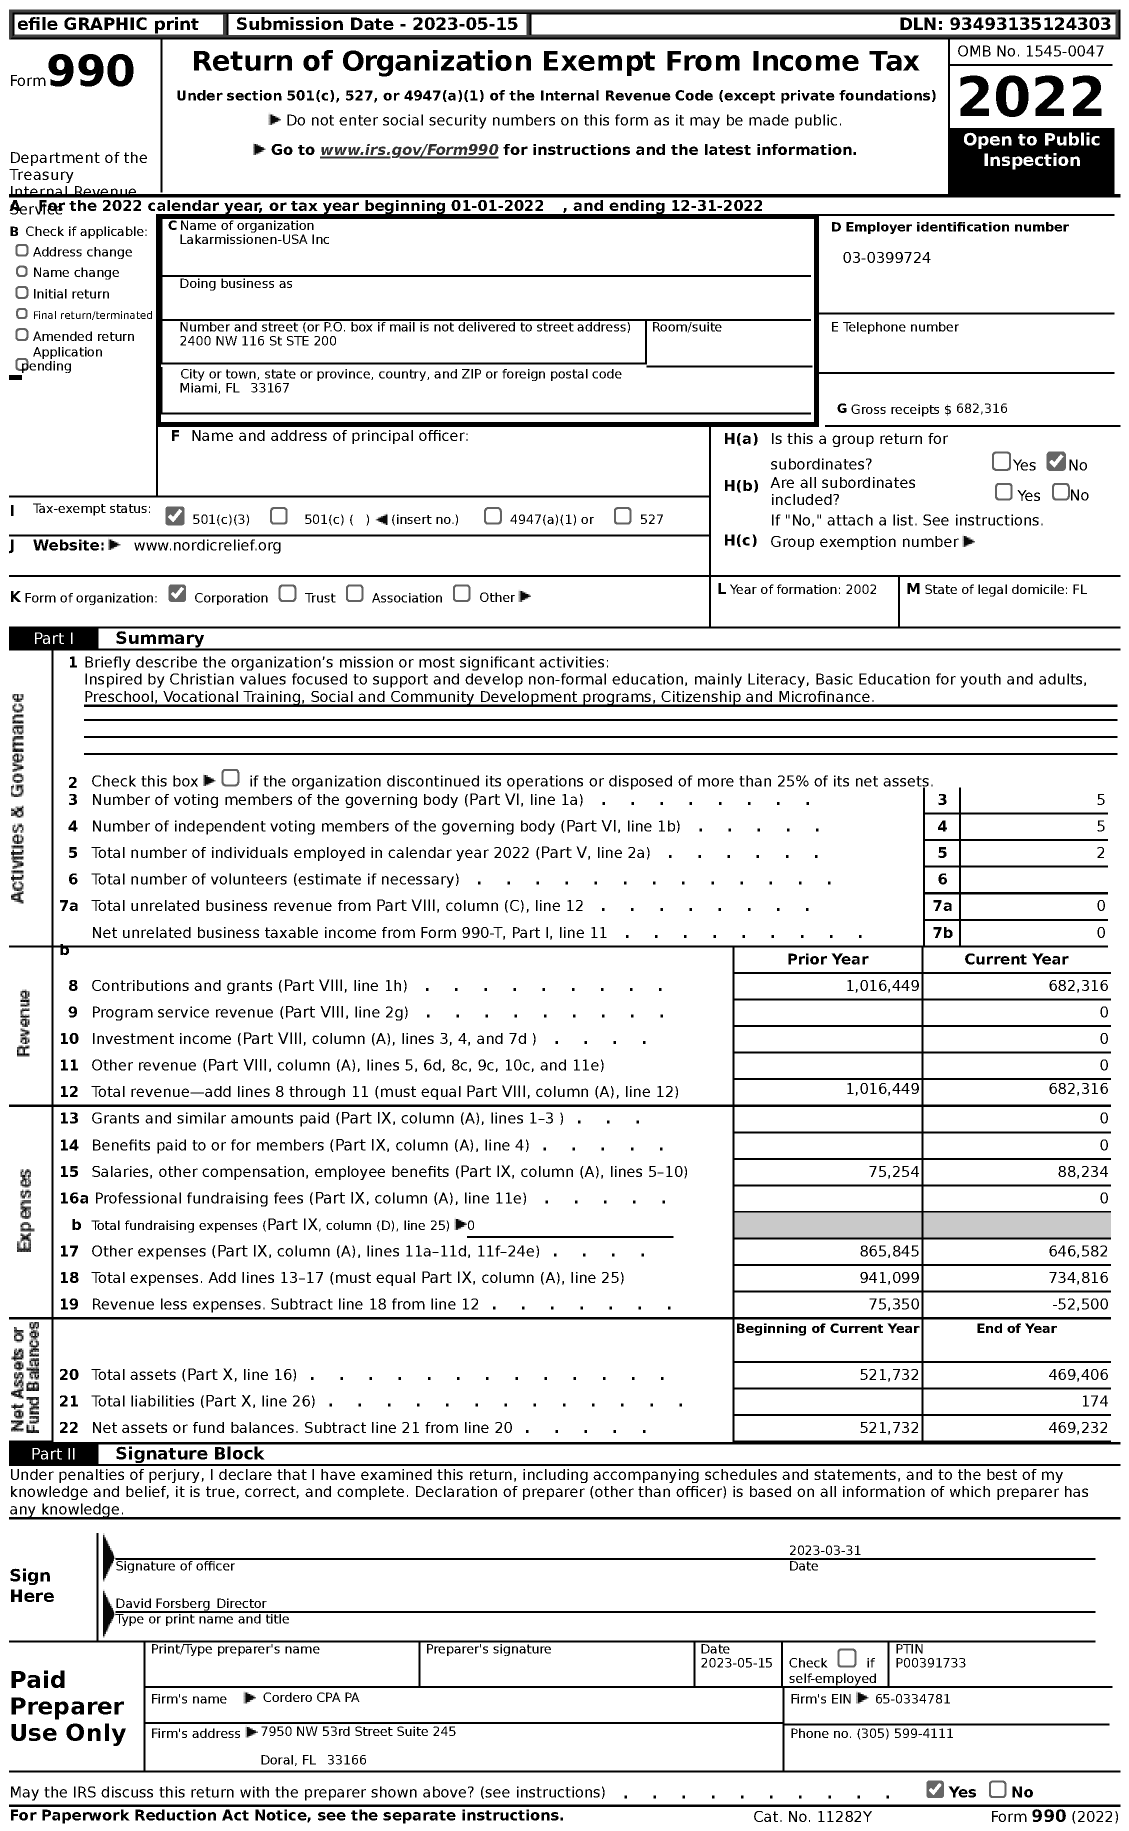 Image of first page of 2022 Form 990 for Lakarmissionen USA